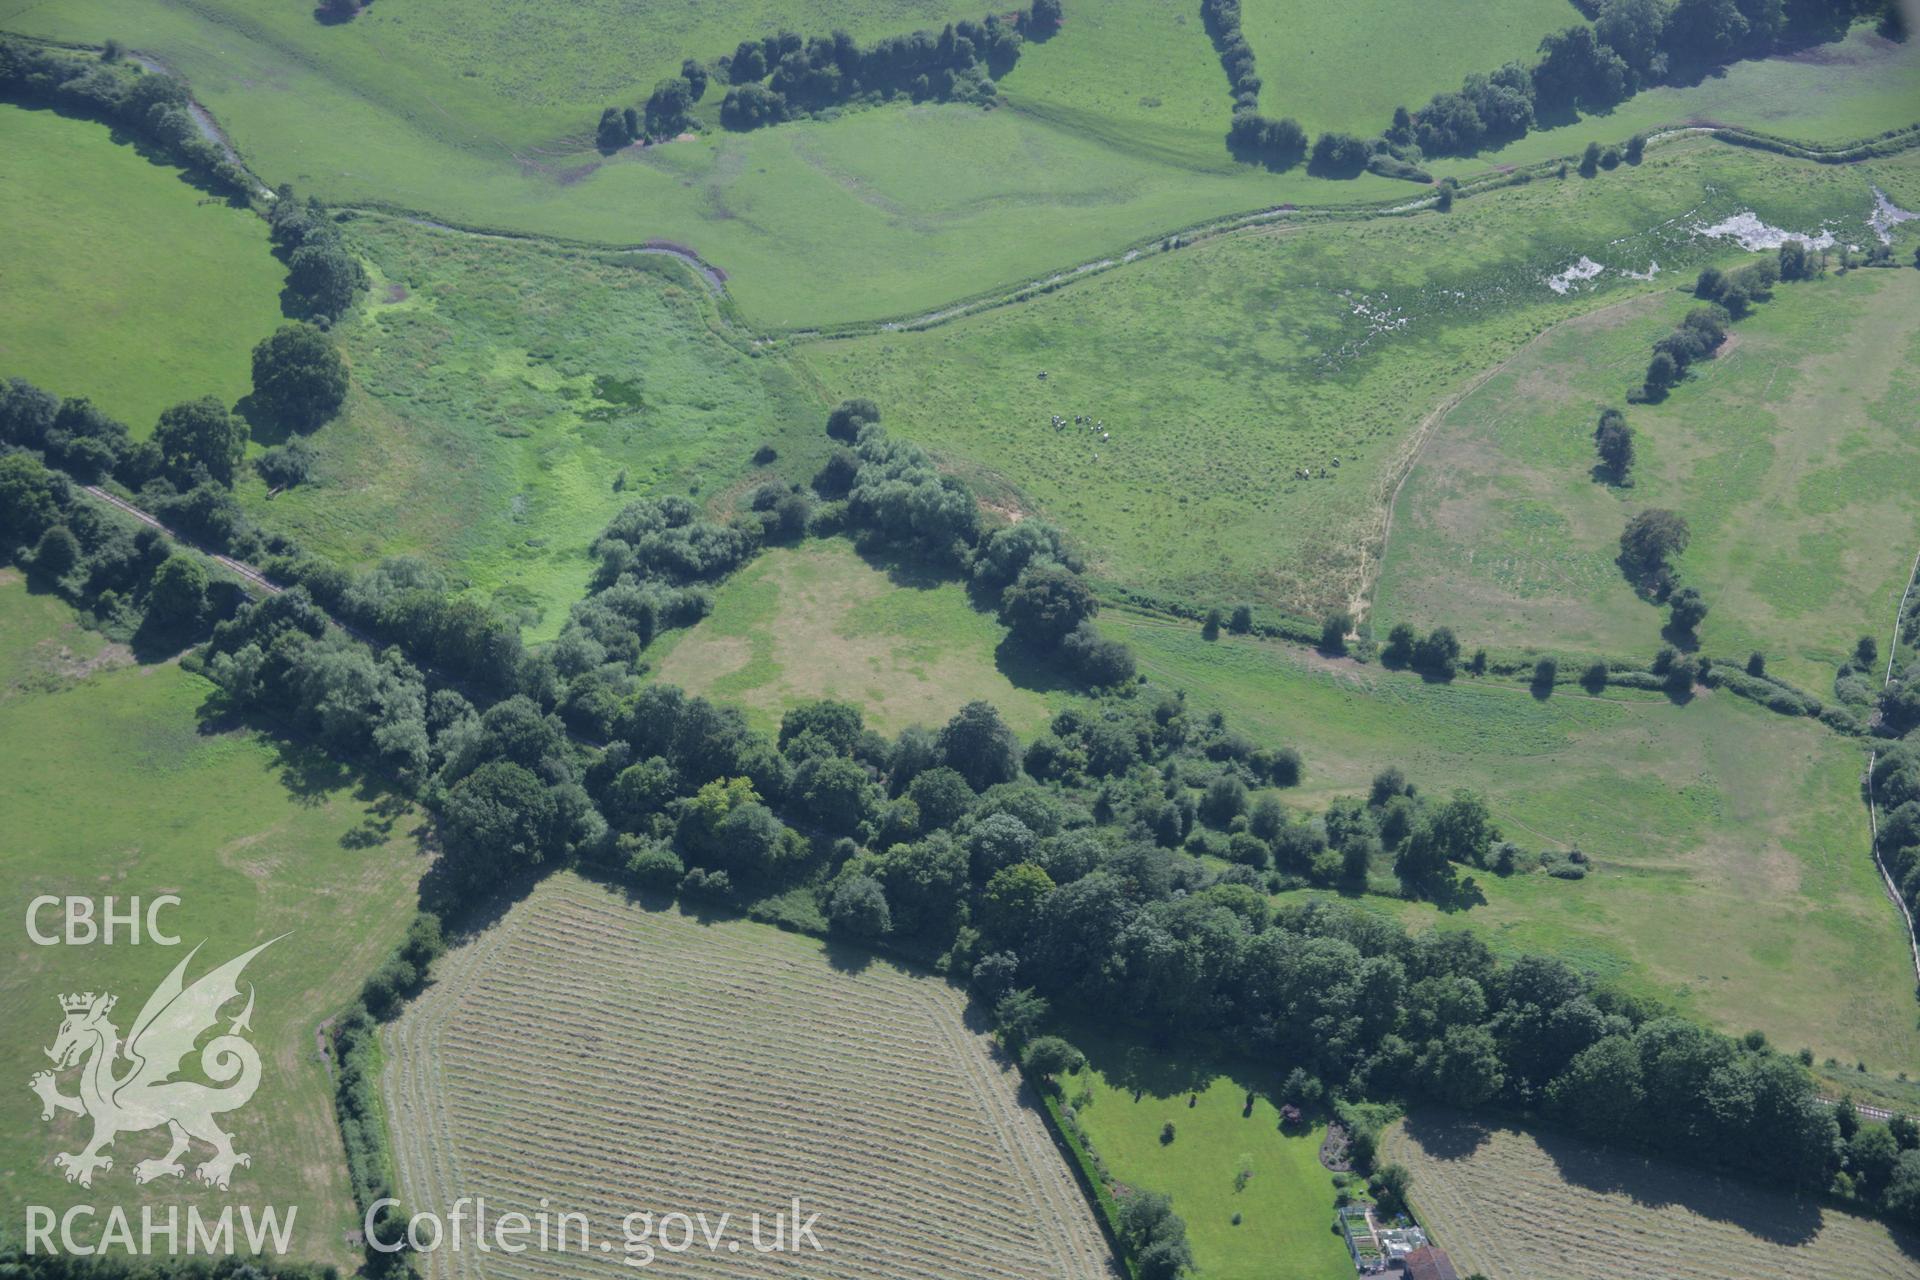 RCAHMW colour oblique aerial photograph of The Berries Earthwork Castle. Taken on 13 July 2006 by Toby Driver.